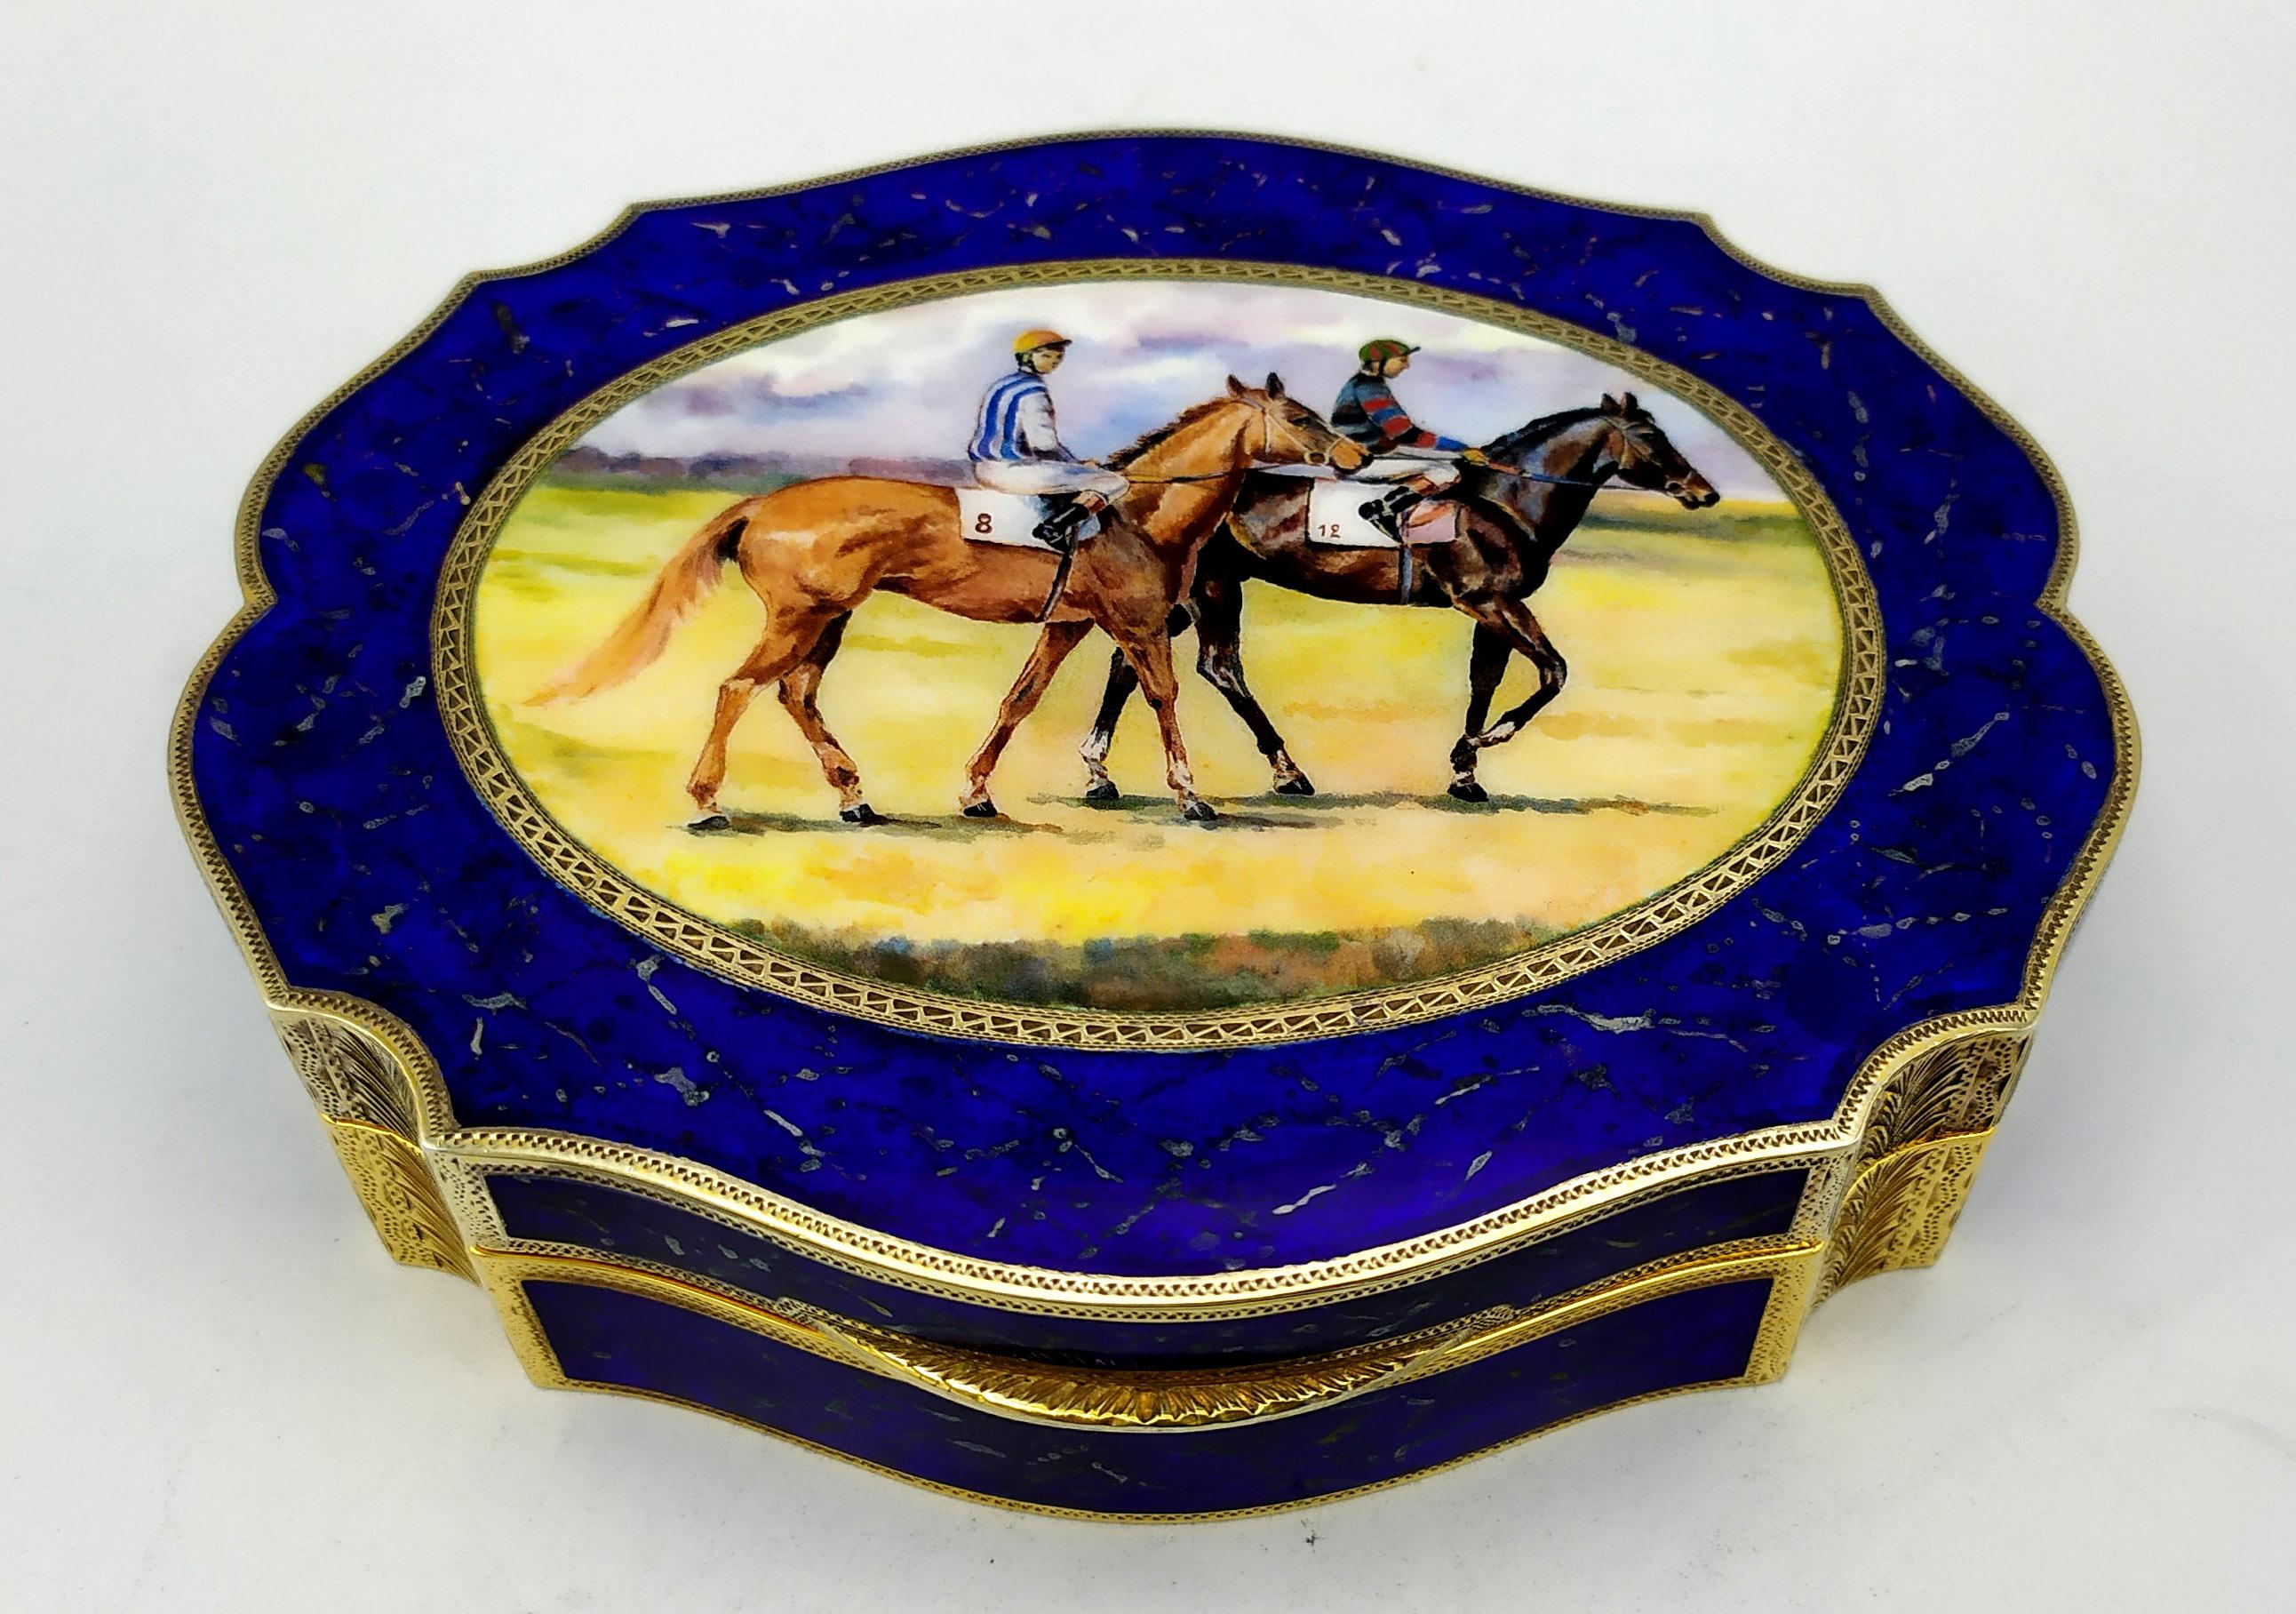 Shaped table box in 925/1000 sterling Silver gold plated with fired enamels painted like lapis lazuli stone and with fired enameled oval miniature, hand painted by the painter Renato Dainelli depicting a horse racing scene with two riders, in